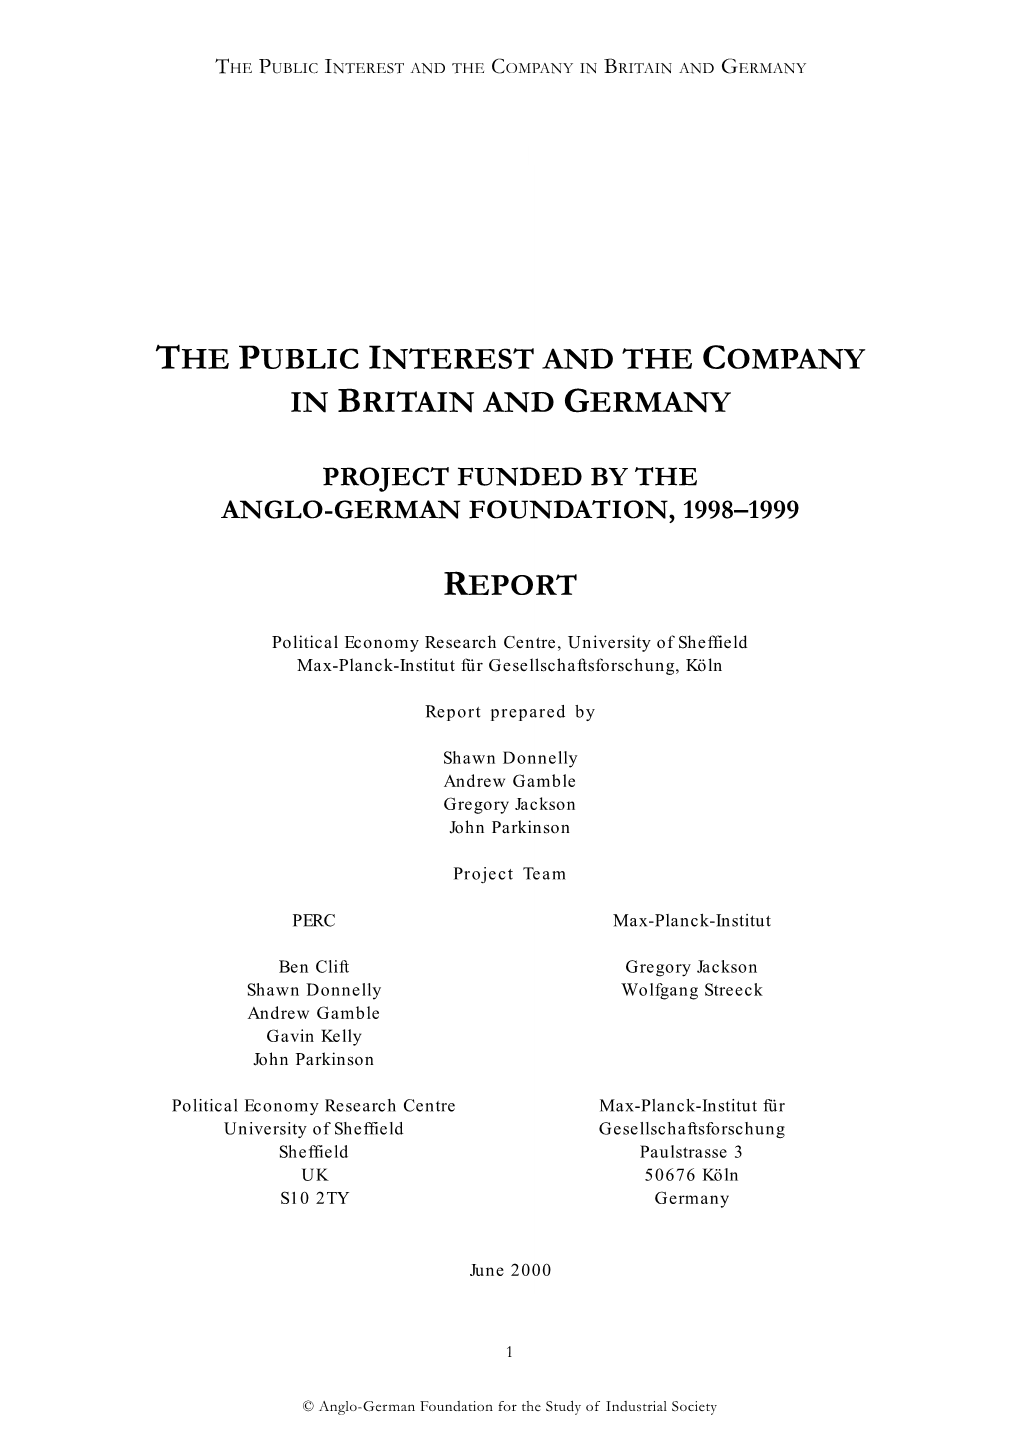 The Public Interest and the Company in Britain and Germany